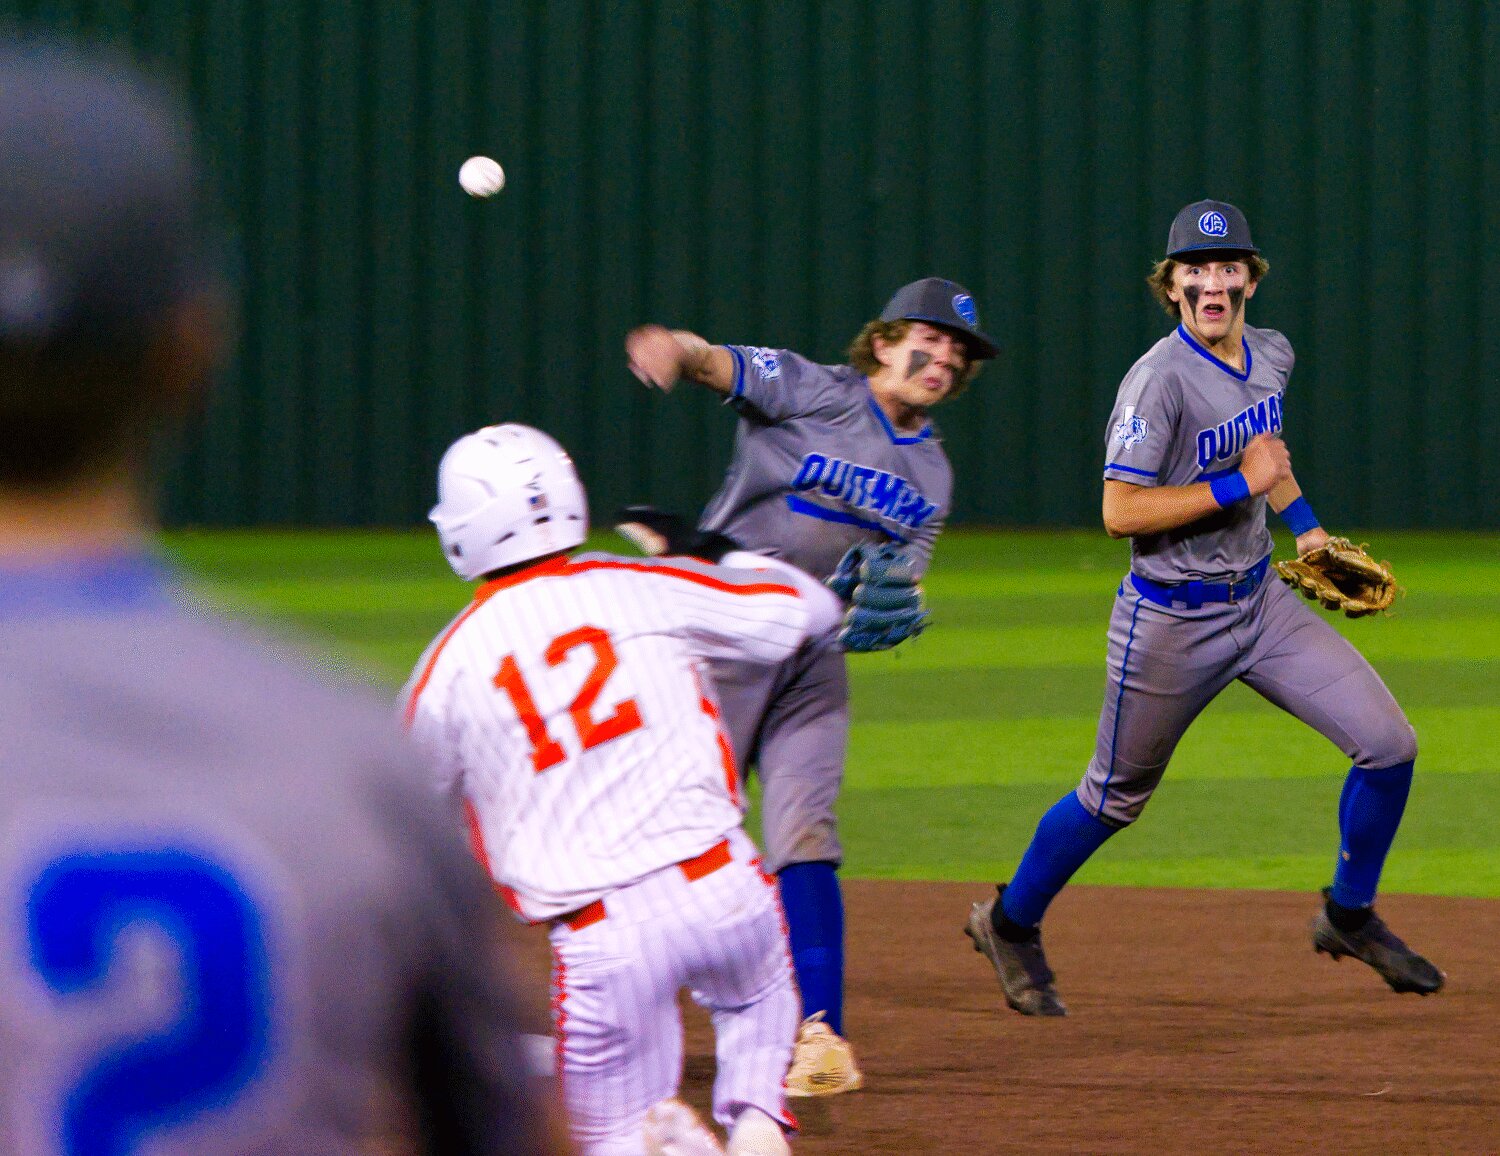 Quitman second baseman Payton Sapp fires the ball over a sliding Jacob Castleberry to turn a double player after receiving a toss from shortstop Davis Watson. [more photos]